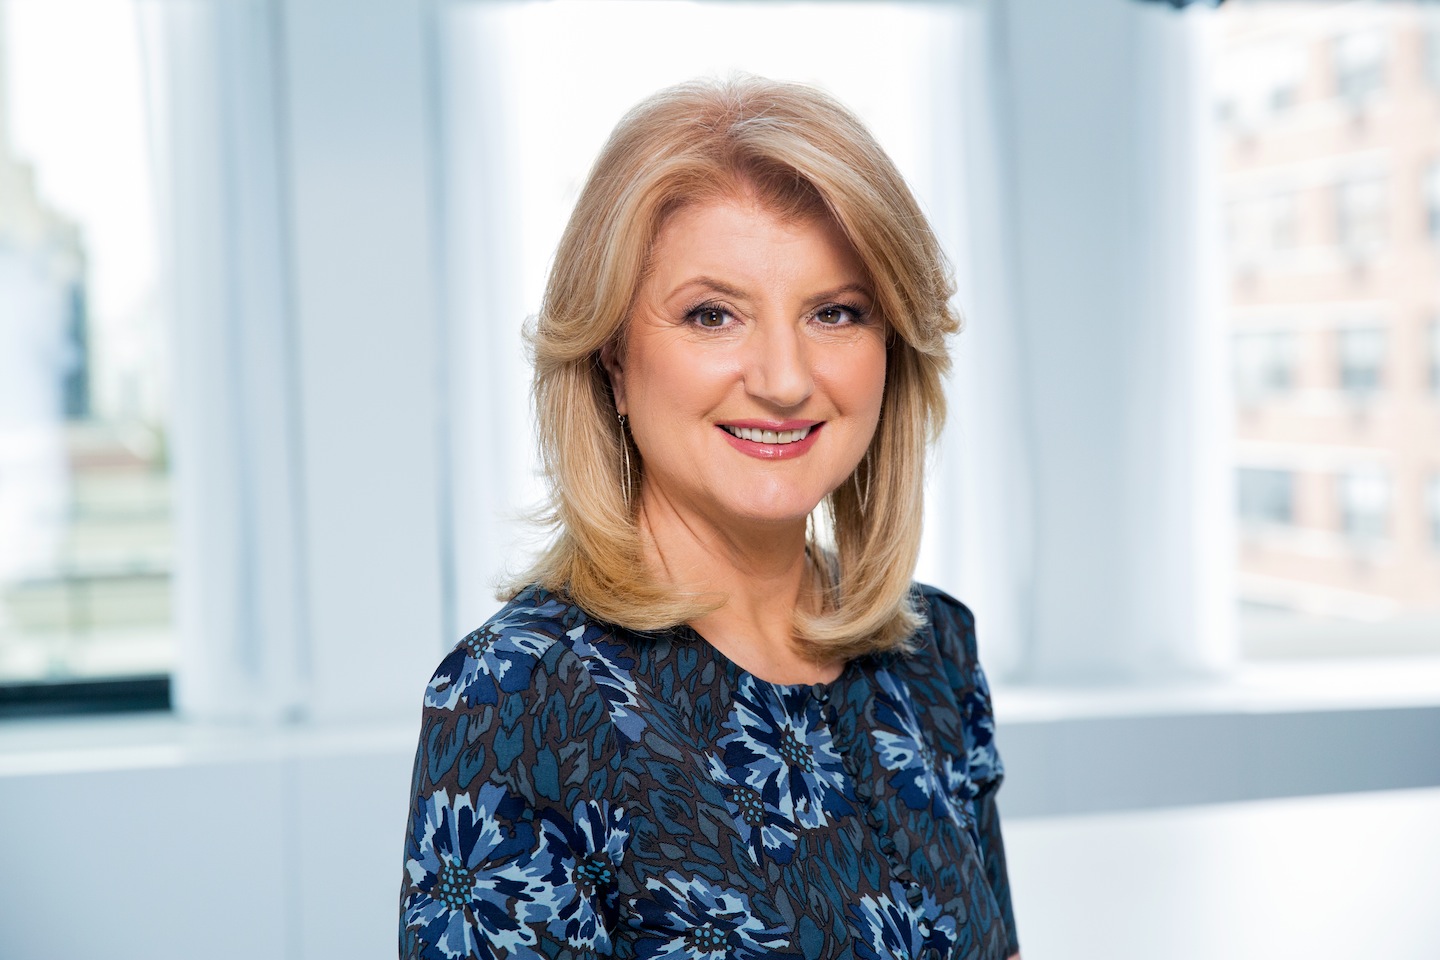 Arianna Huffington, President & Editor-In-Chief, The Huffington Post